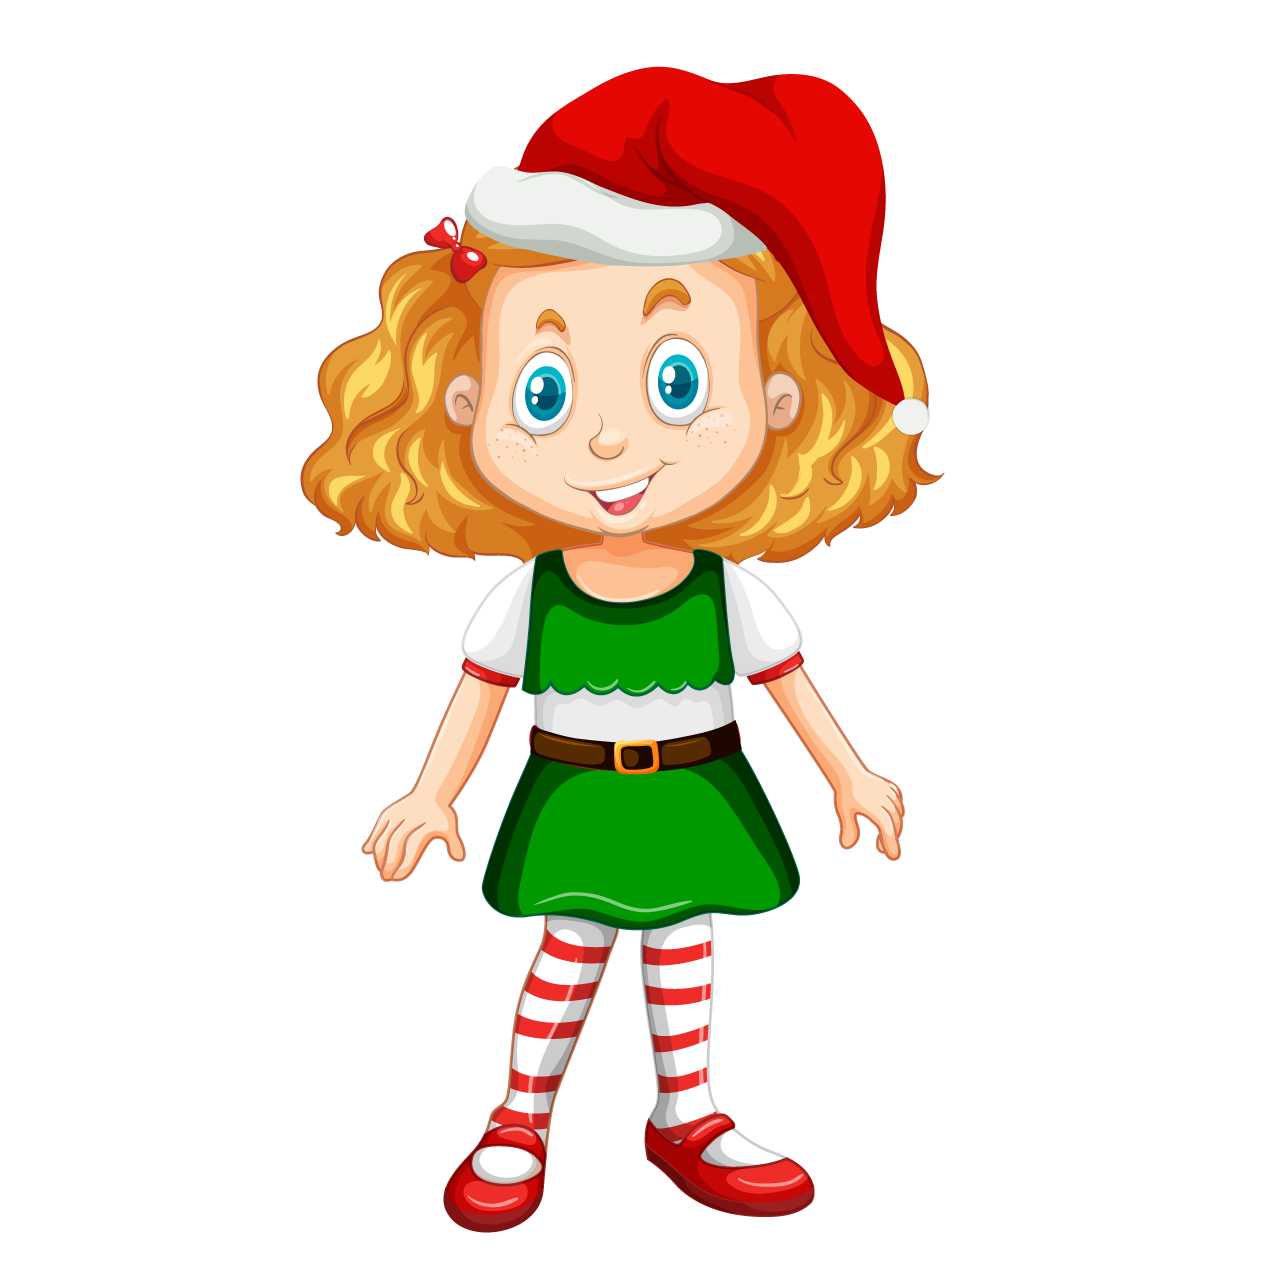 Cute girl christmas costume character image transparent background